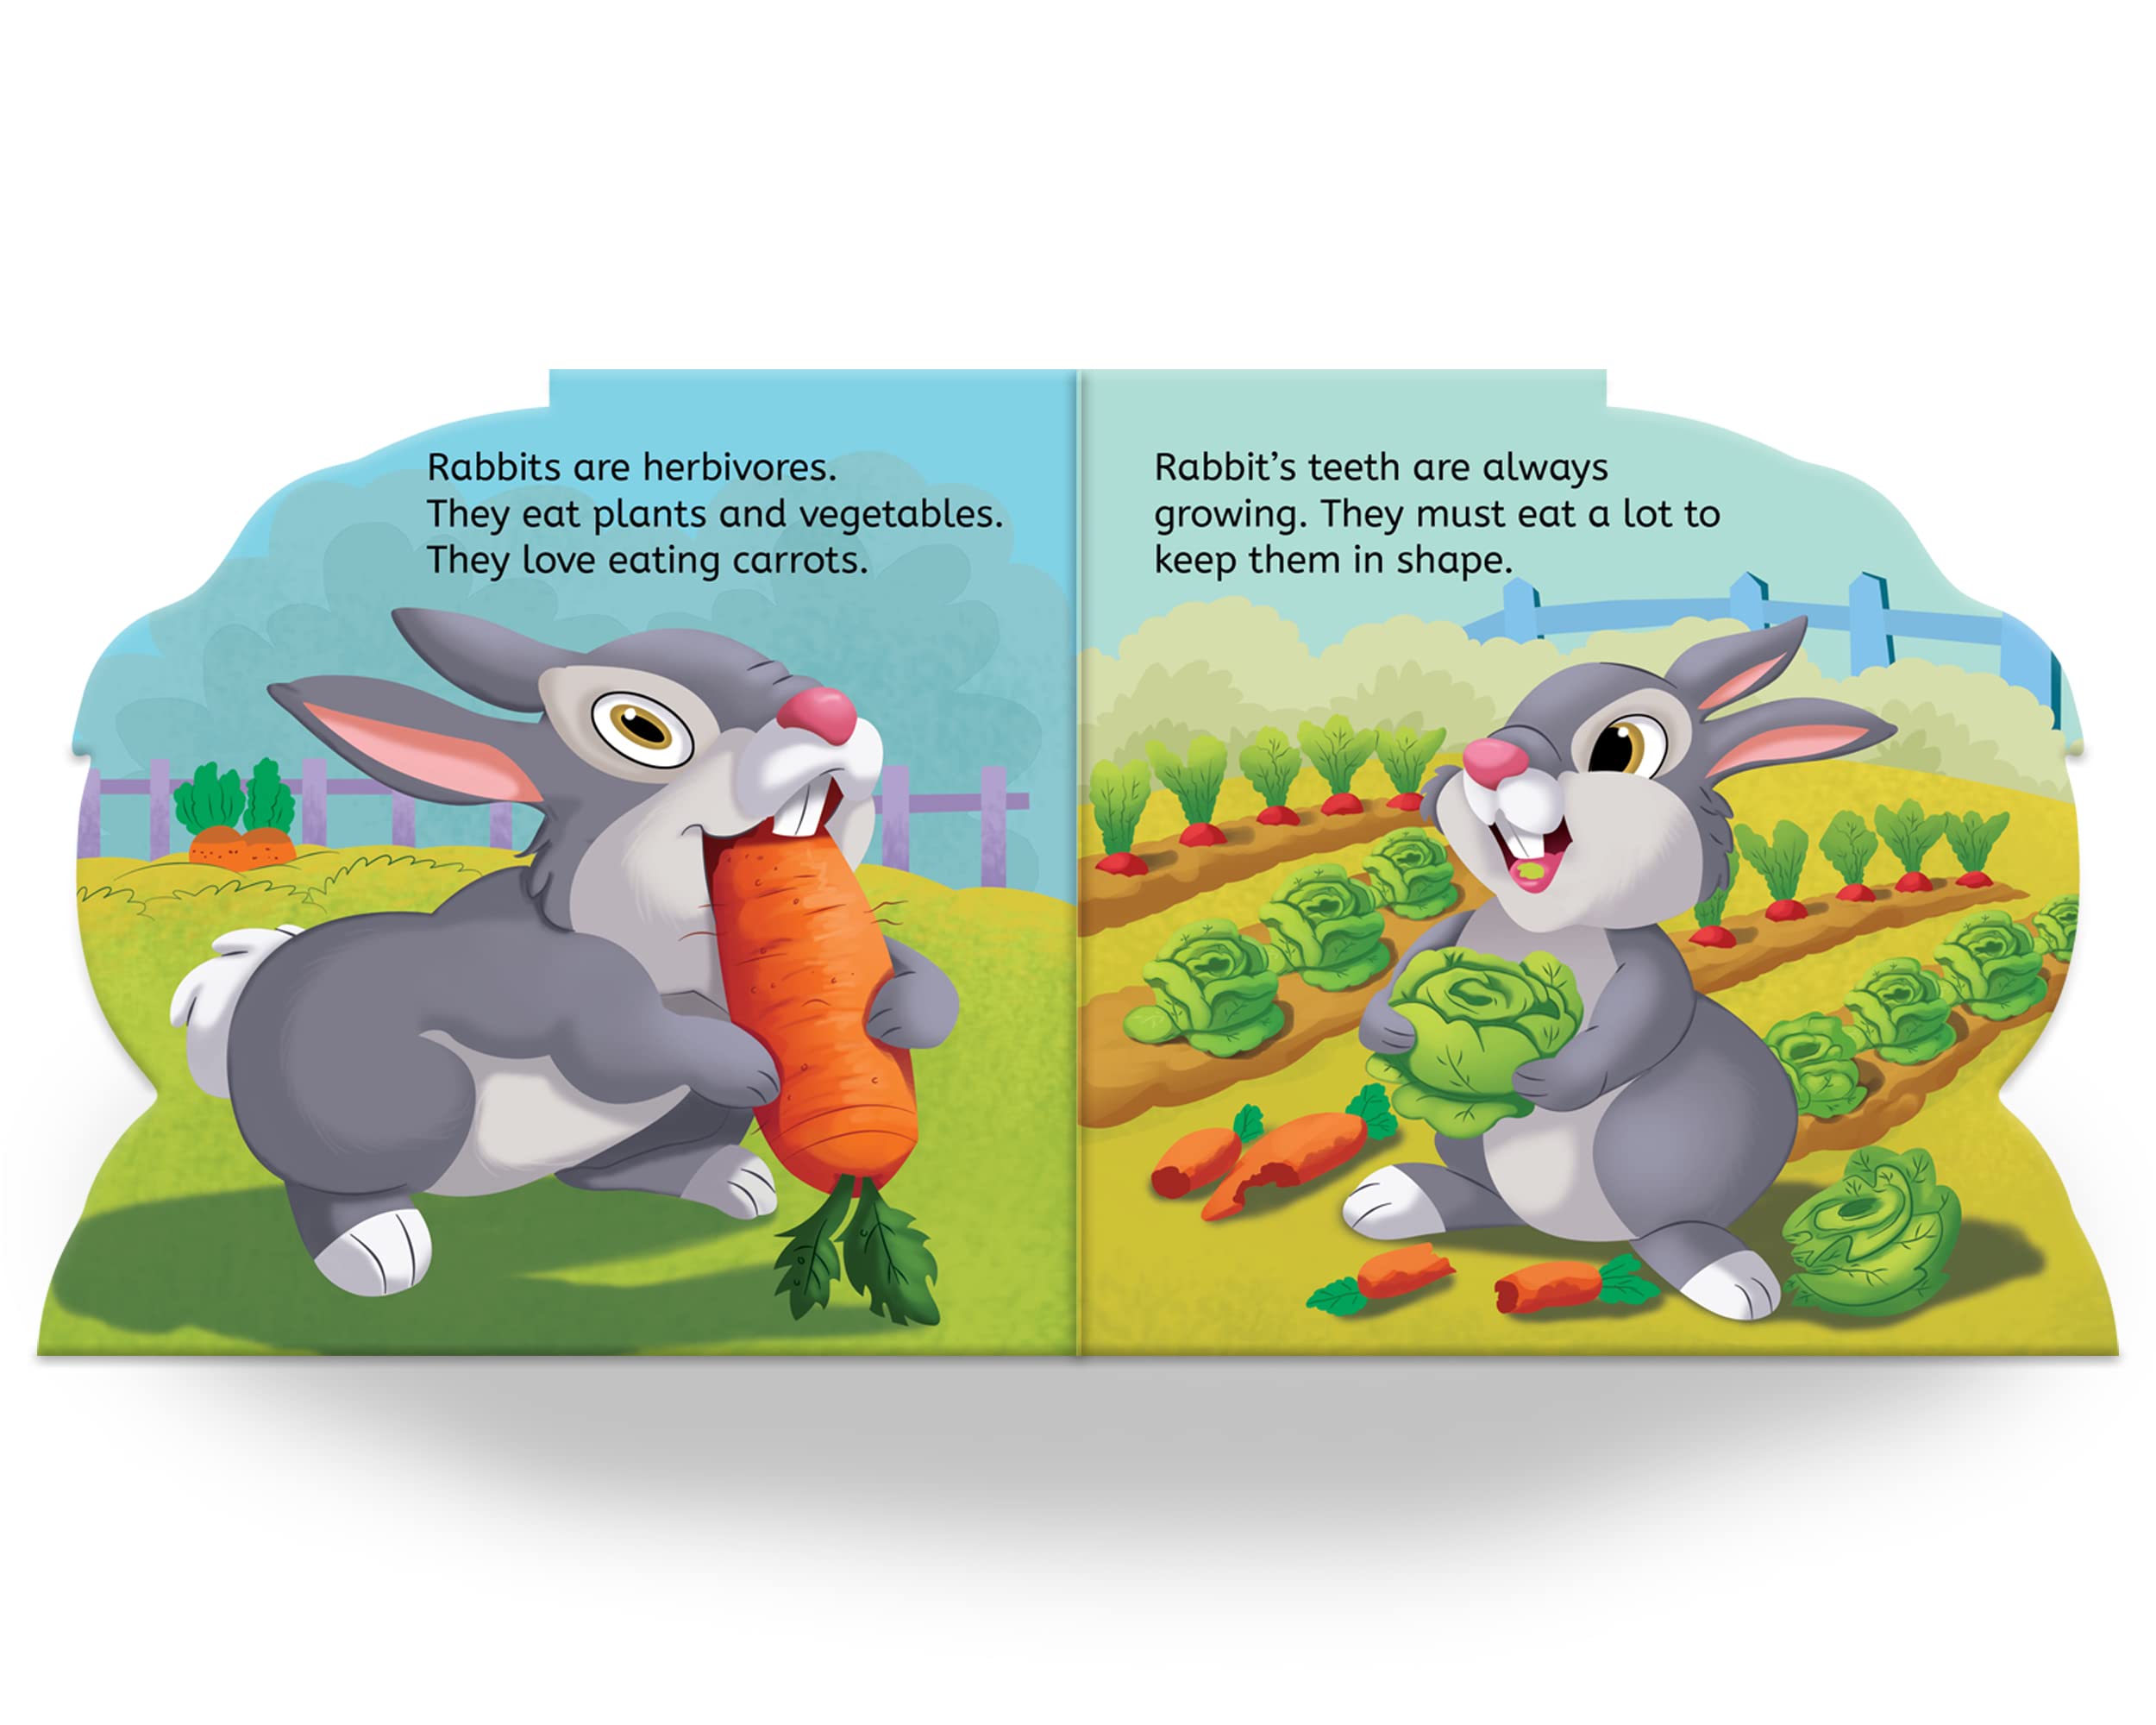 My First Shaped Board Book - Rabbits